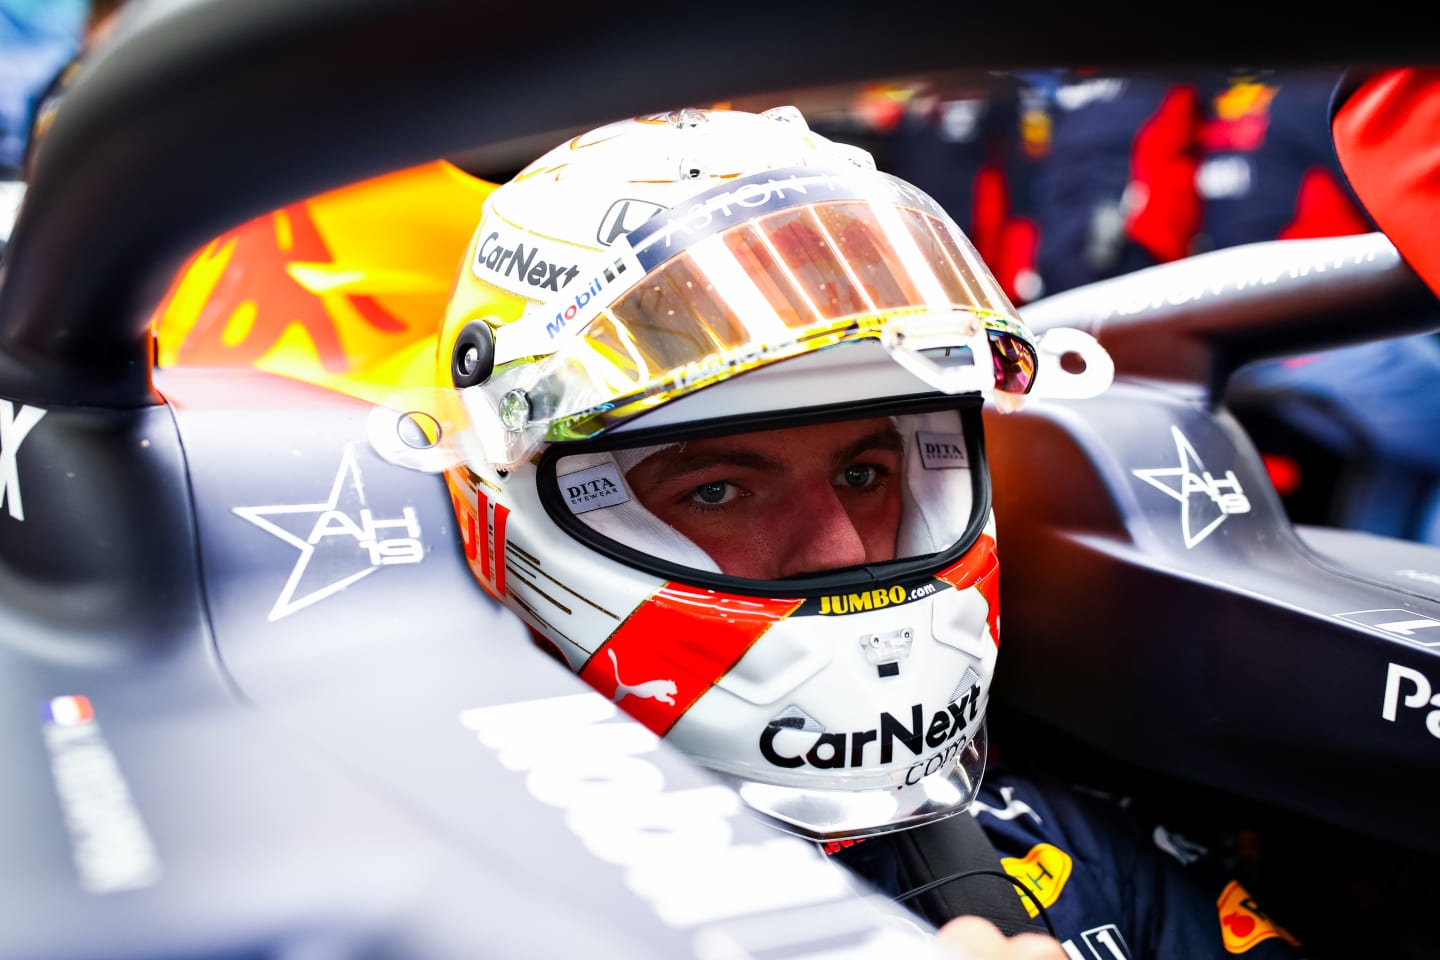 SPA, BELGIUM - AUGUST 28: Max Verstappen of Netherlands and Red Bull Racing prepares to drive in the garage during practice for the F1 Grand Prix of Belgium at Circuit de Spa-Francorchamps on August 28, 2020 in Spa, Belgium. (Photo by Mark Thompson/Getty Images,)